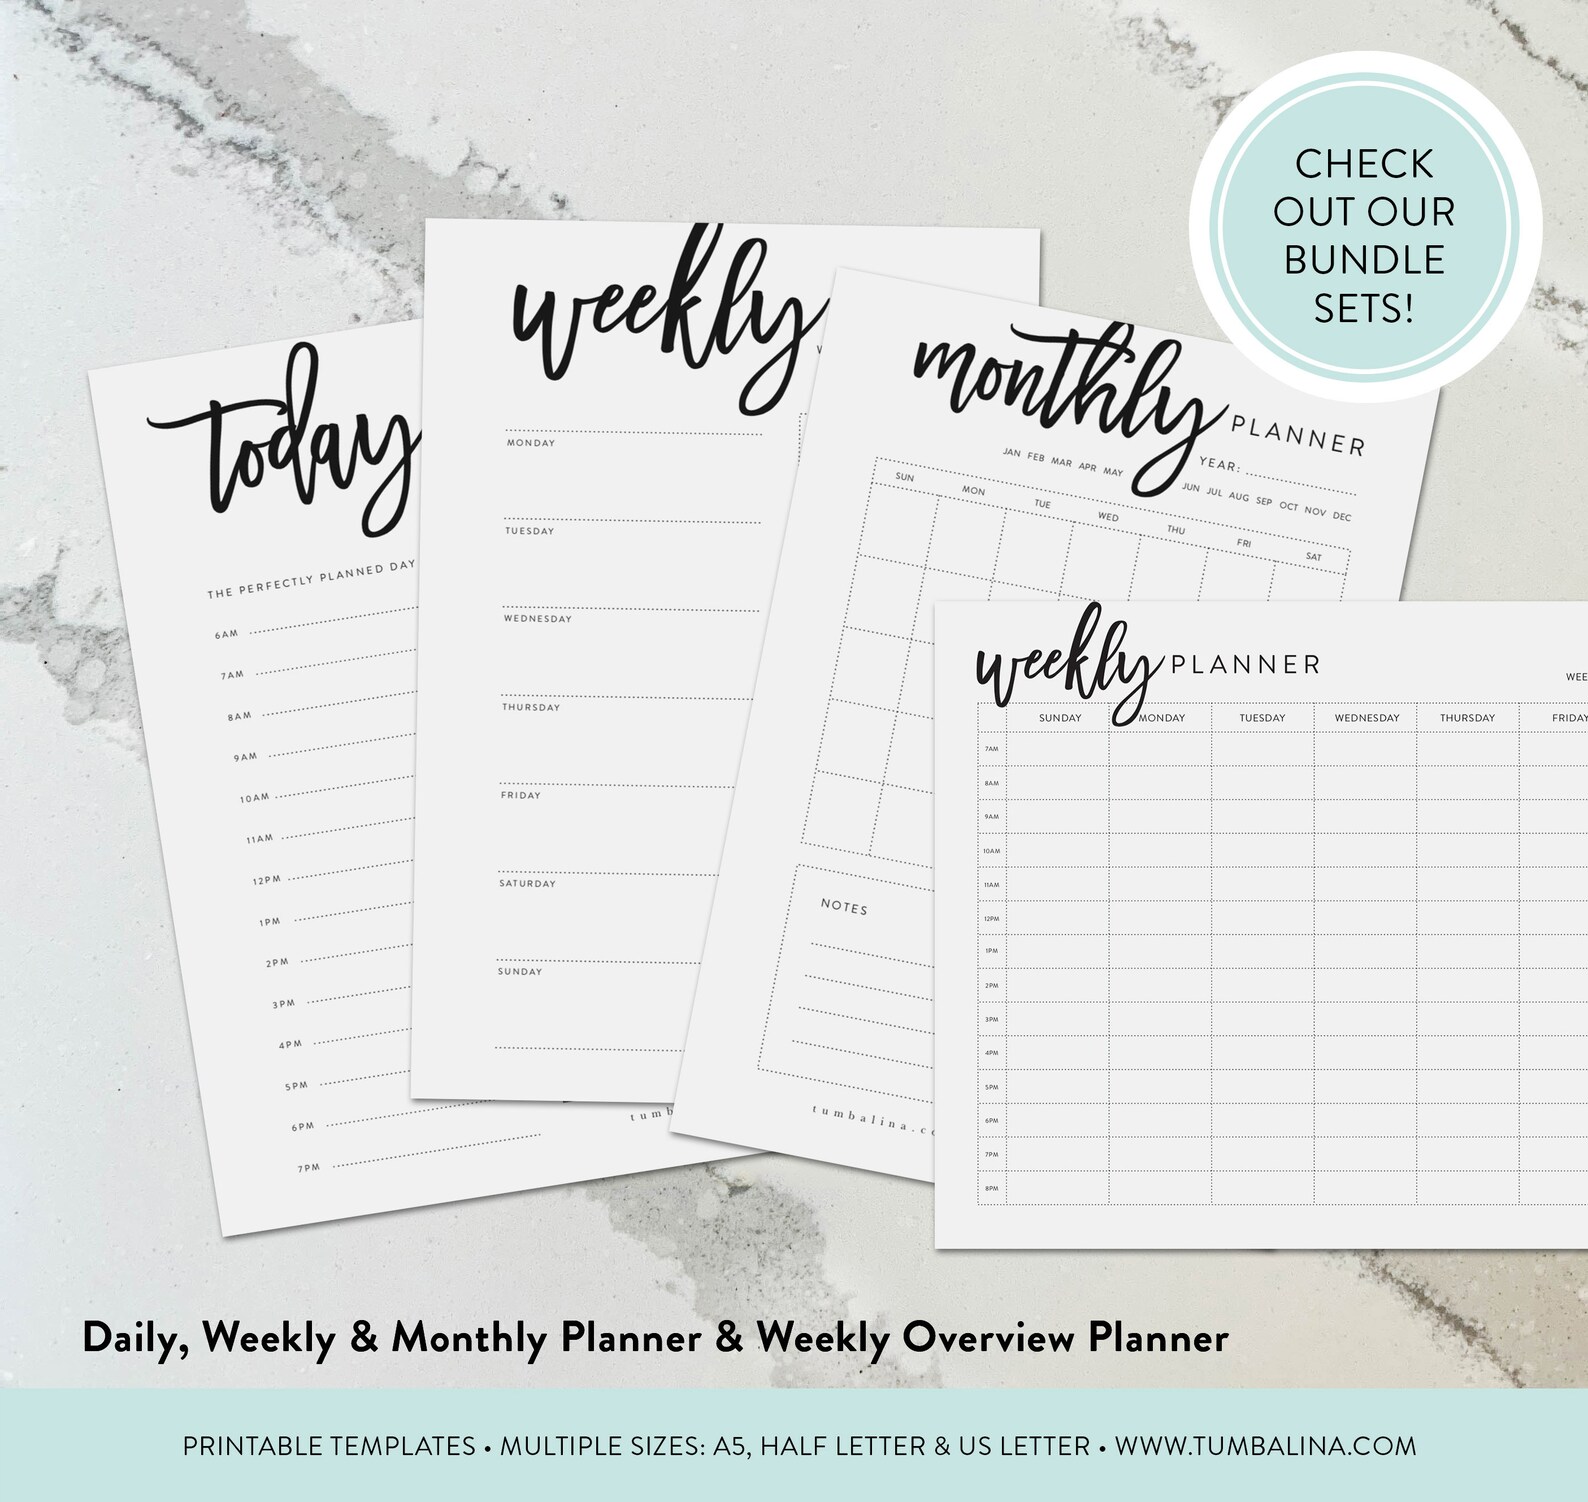 Daily Organizer Printable Daily Planner Productivity | Etsy